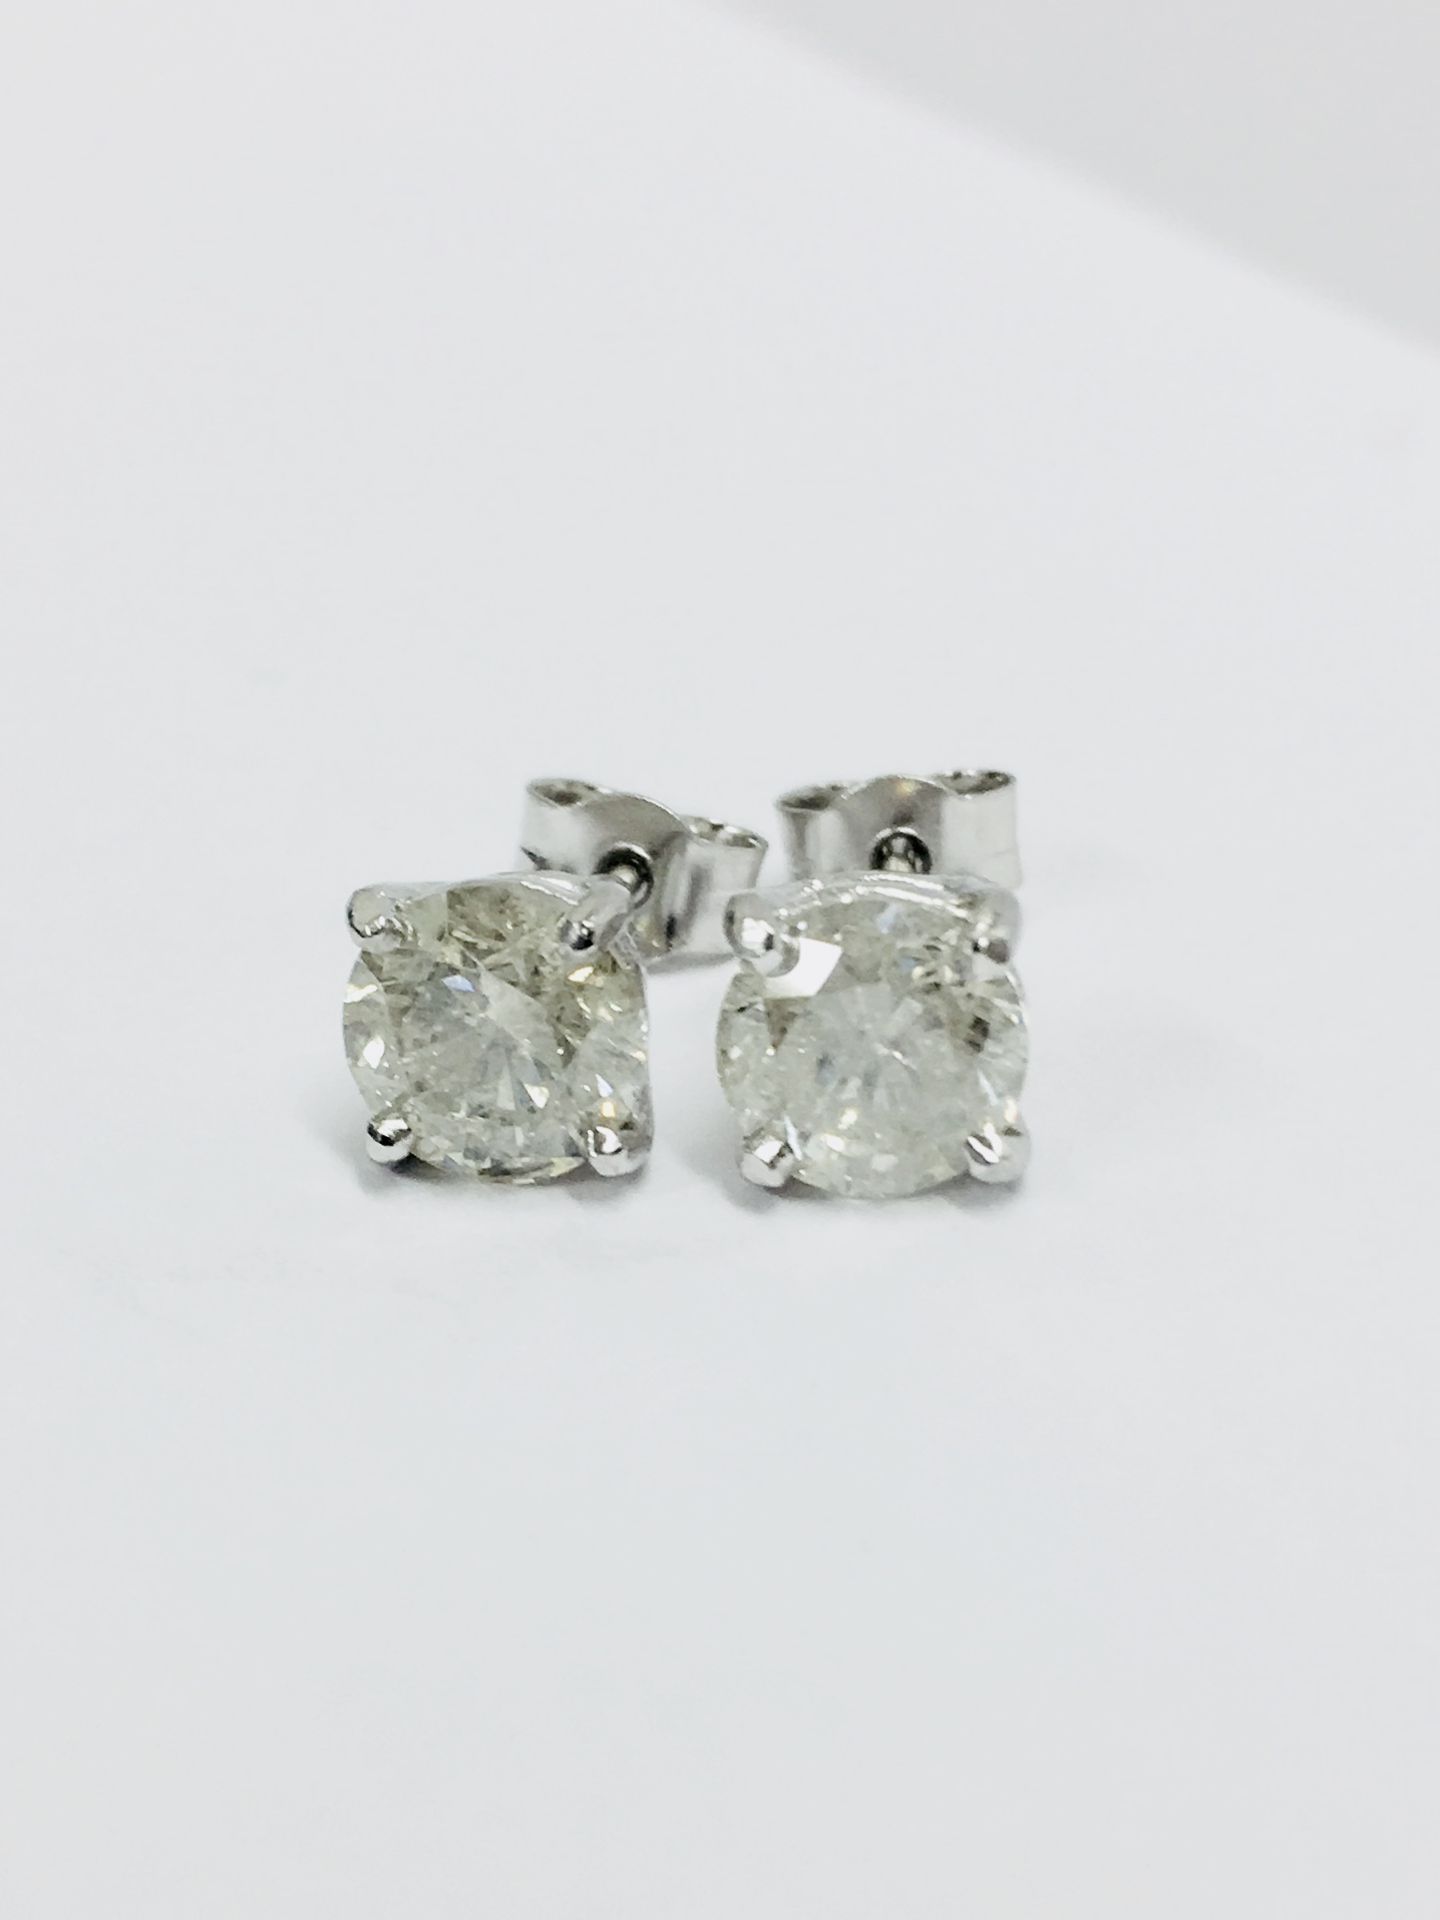 2.00Ct Solitaire Diamond Stud Earrings Set With Brilliant Cut Diamonds Which Have Been Enhanced. - Image 2 of 19